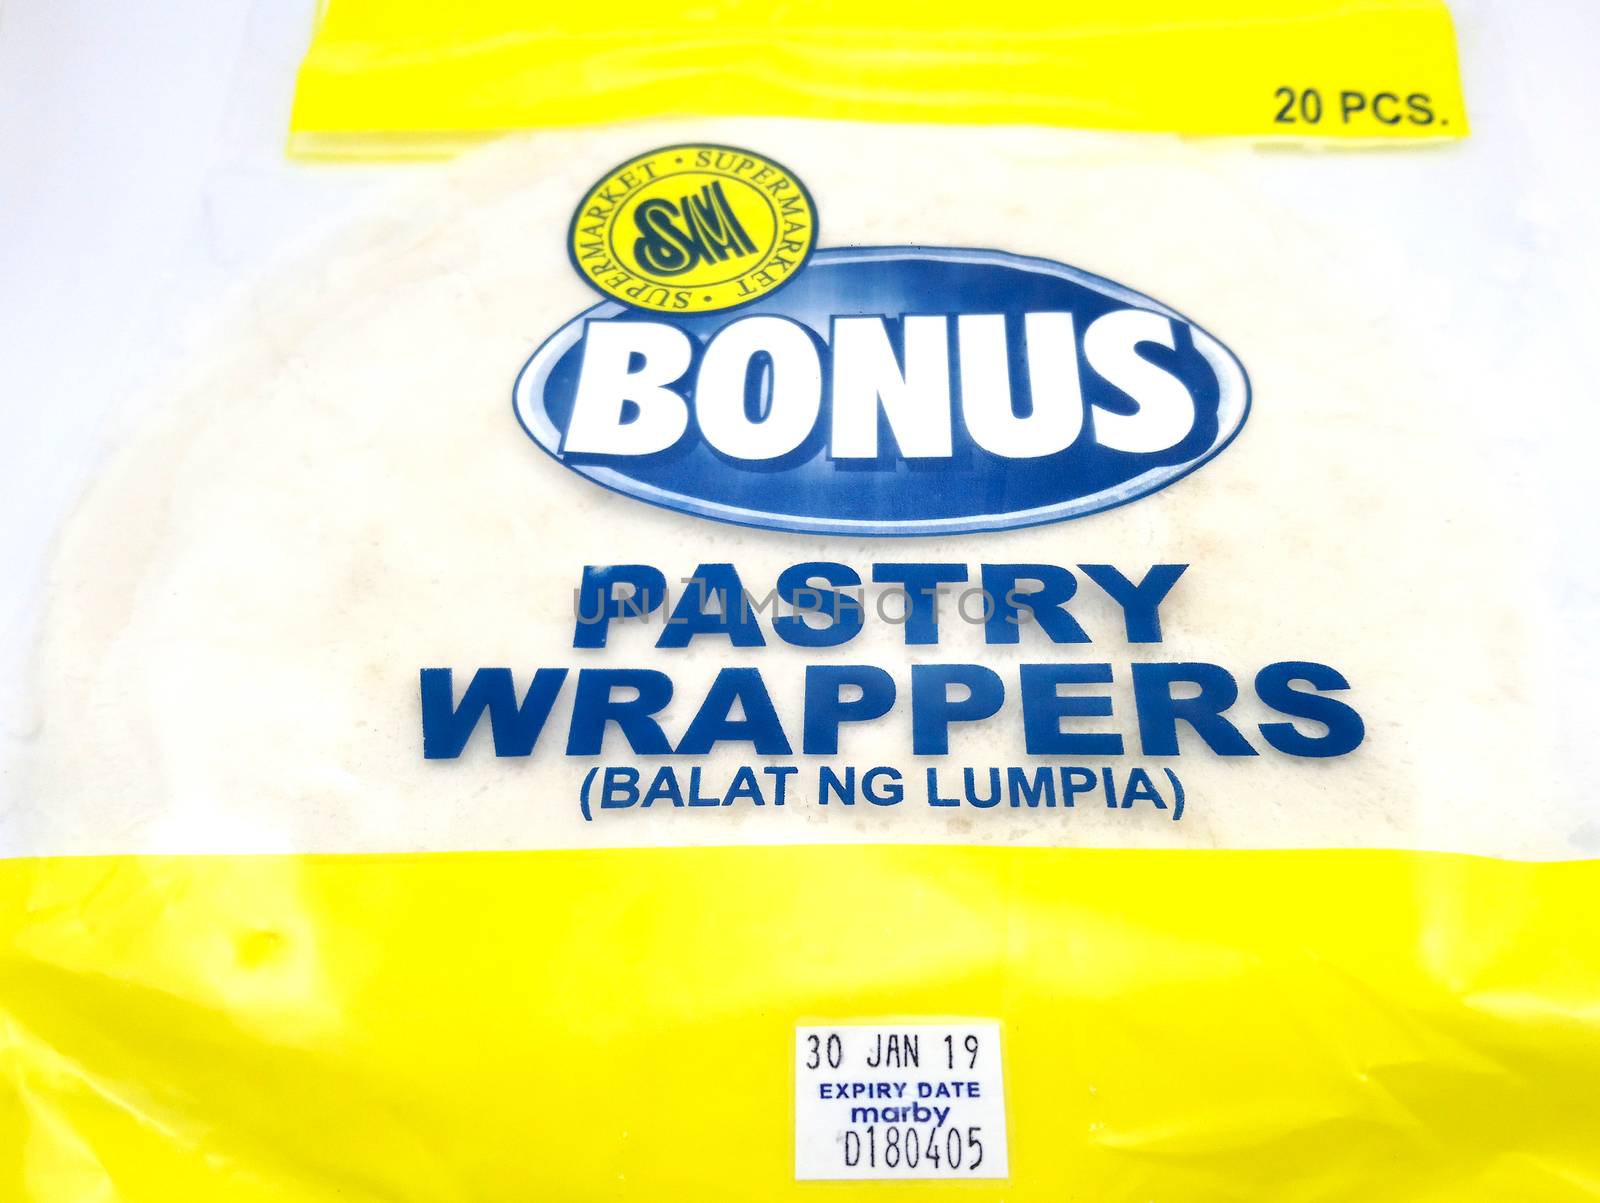 SM bonus pastry wrappers in Manila, Philippines by imwaltersy